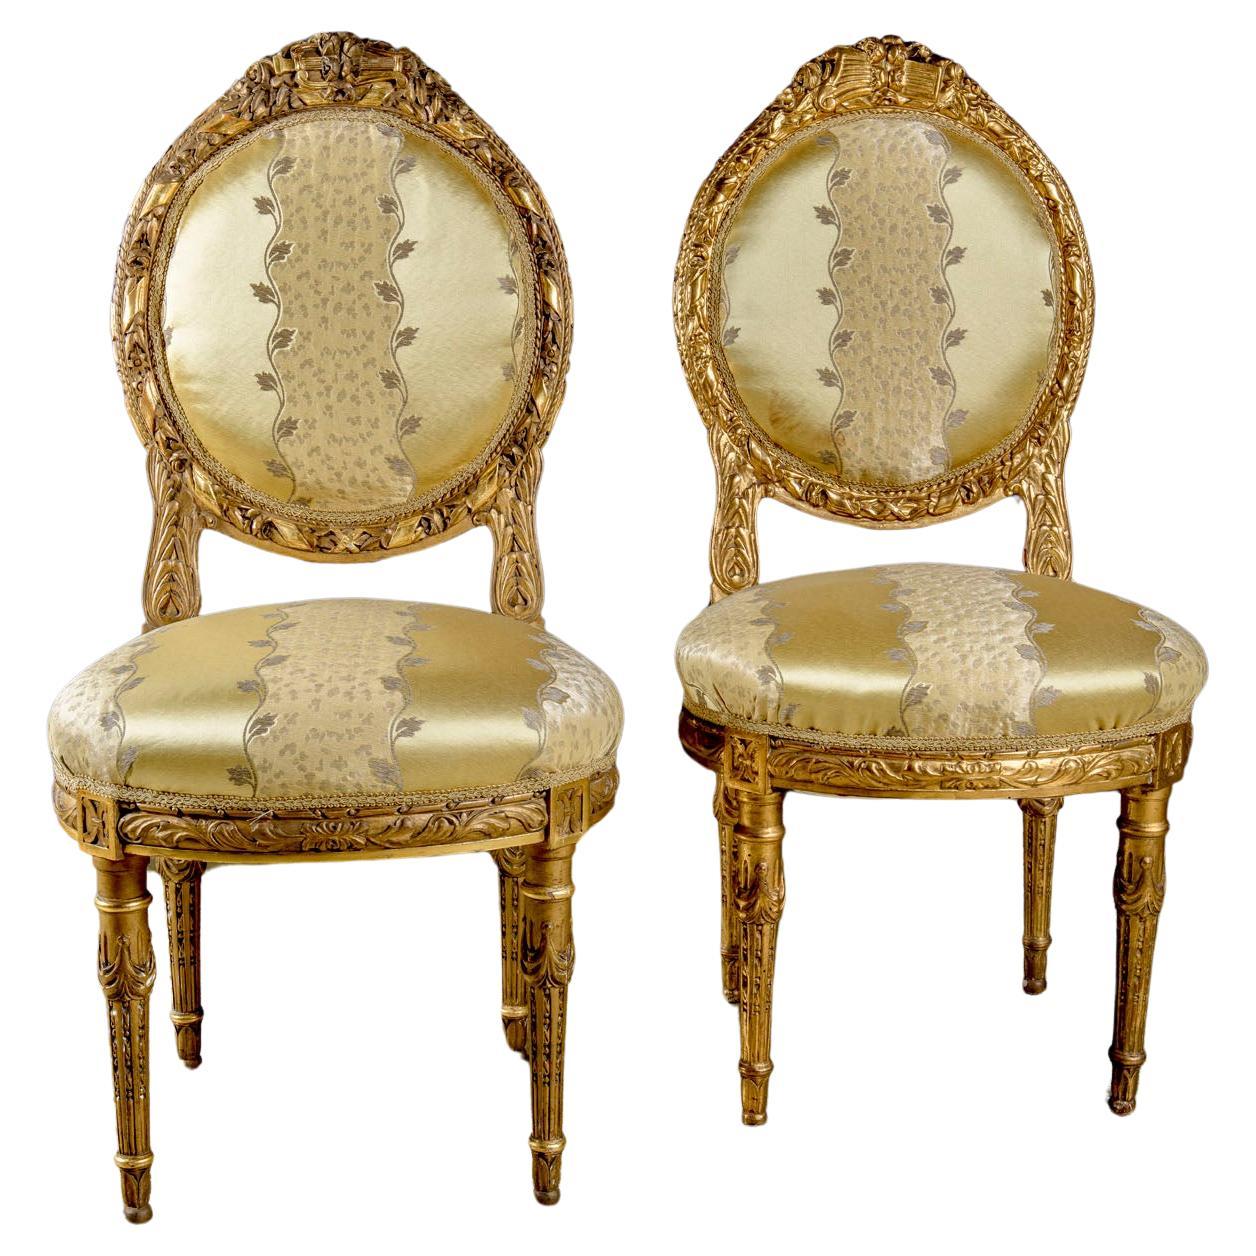 Pair of Maison Jansen Giltwood French Louis XVI Style Chairs